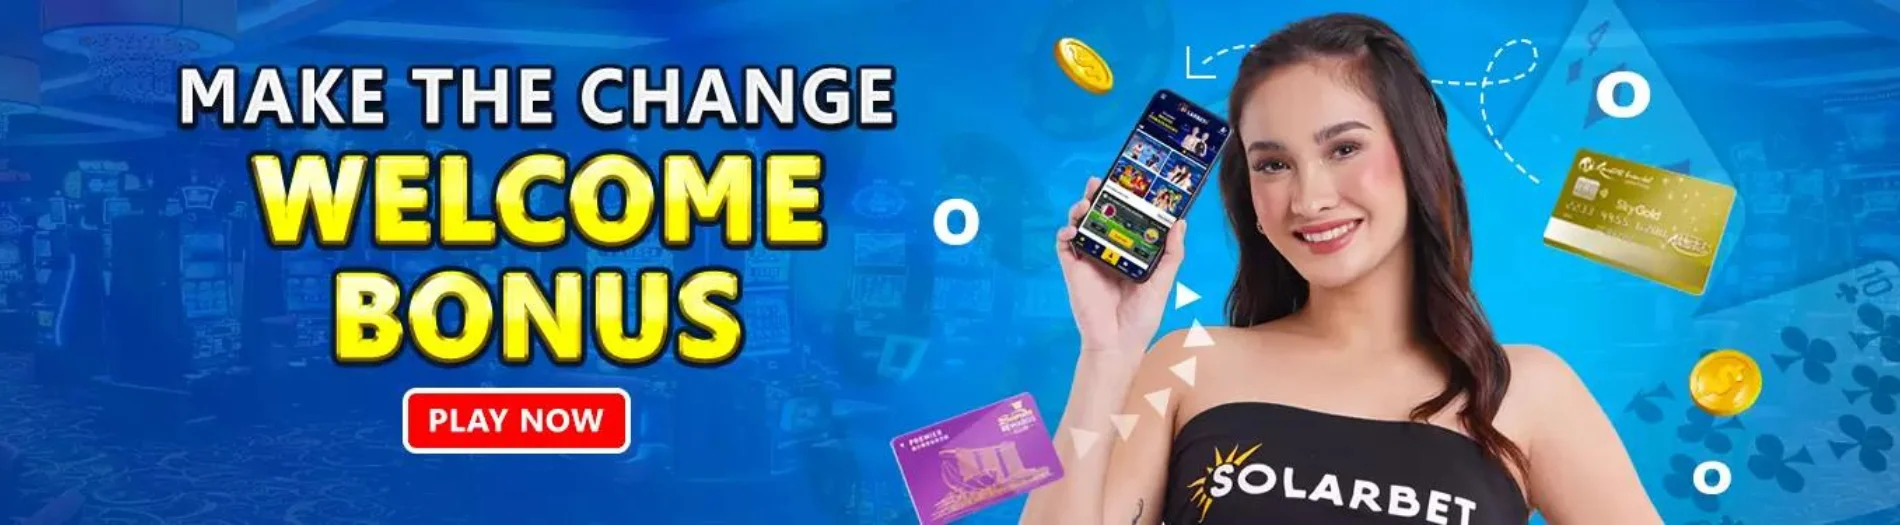 Find all the most common casino bonuses at Solarbet Singapore.